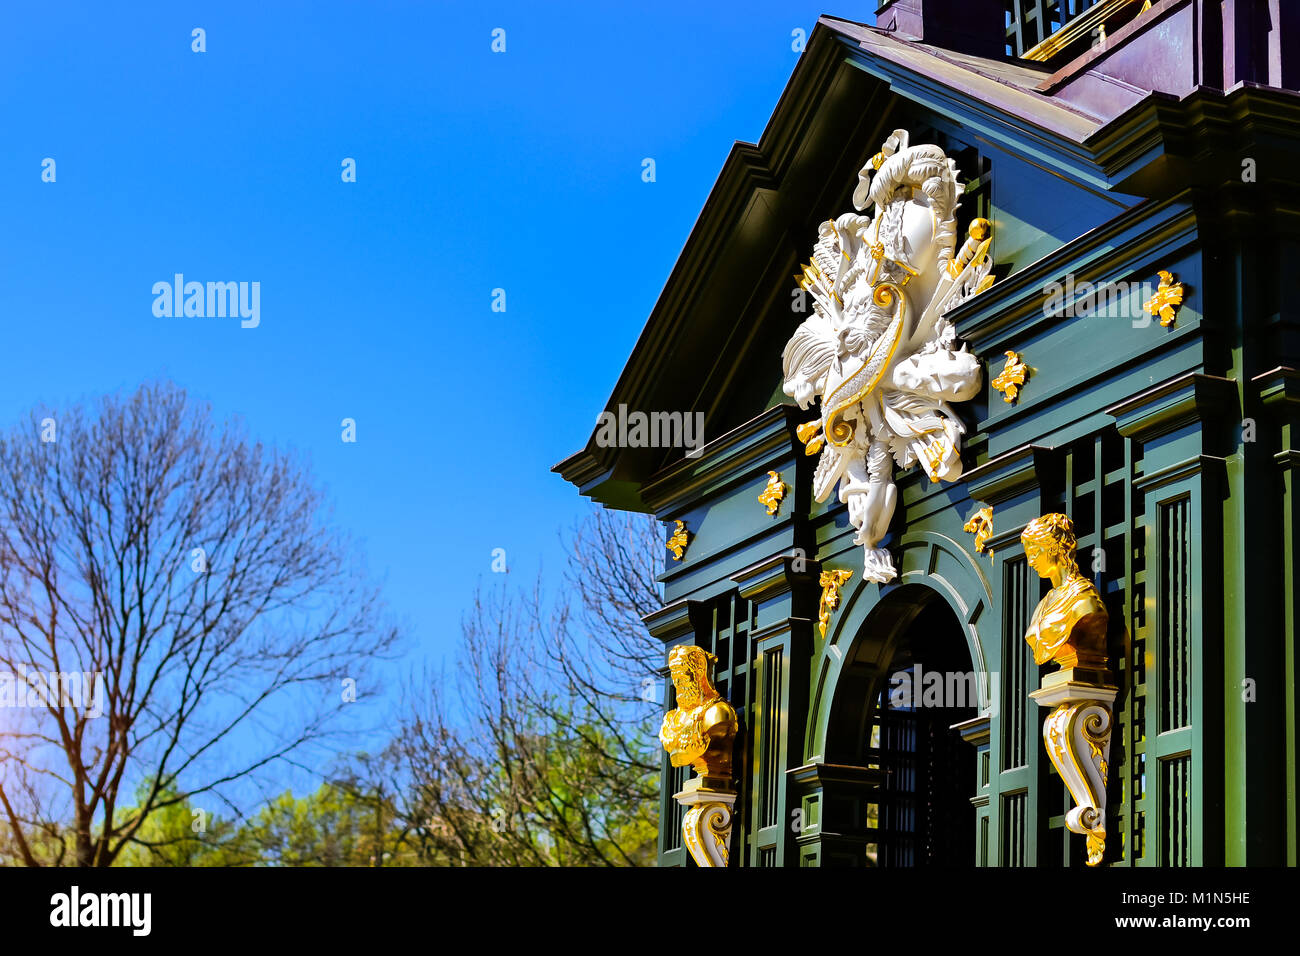 Sculptures in Park of Branicki Palace and Medical University of Bialystok Clinical Hospitals in Poland. Architecture of baroque mansions - historical  Stock Photo